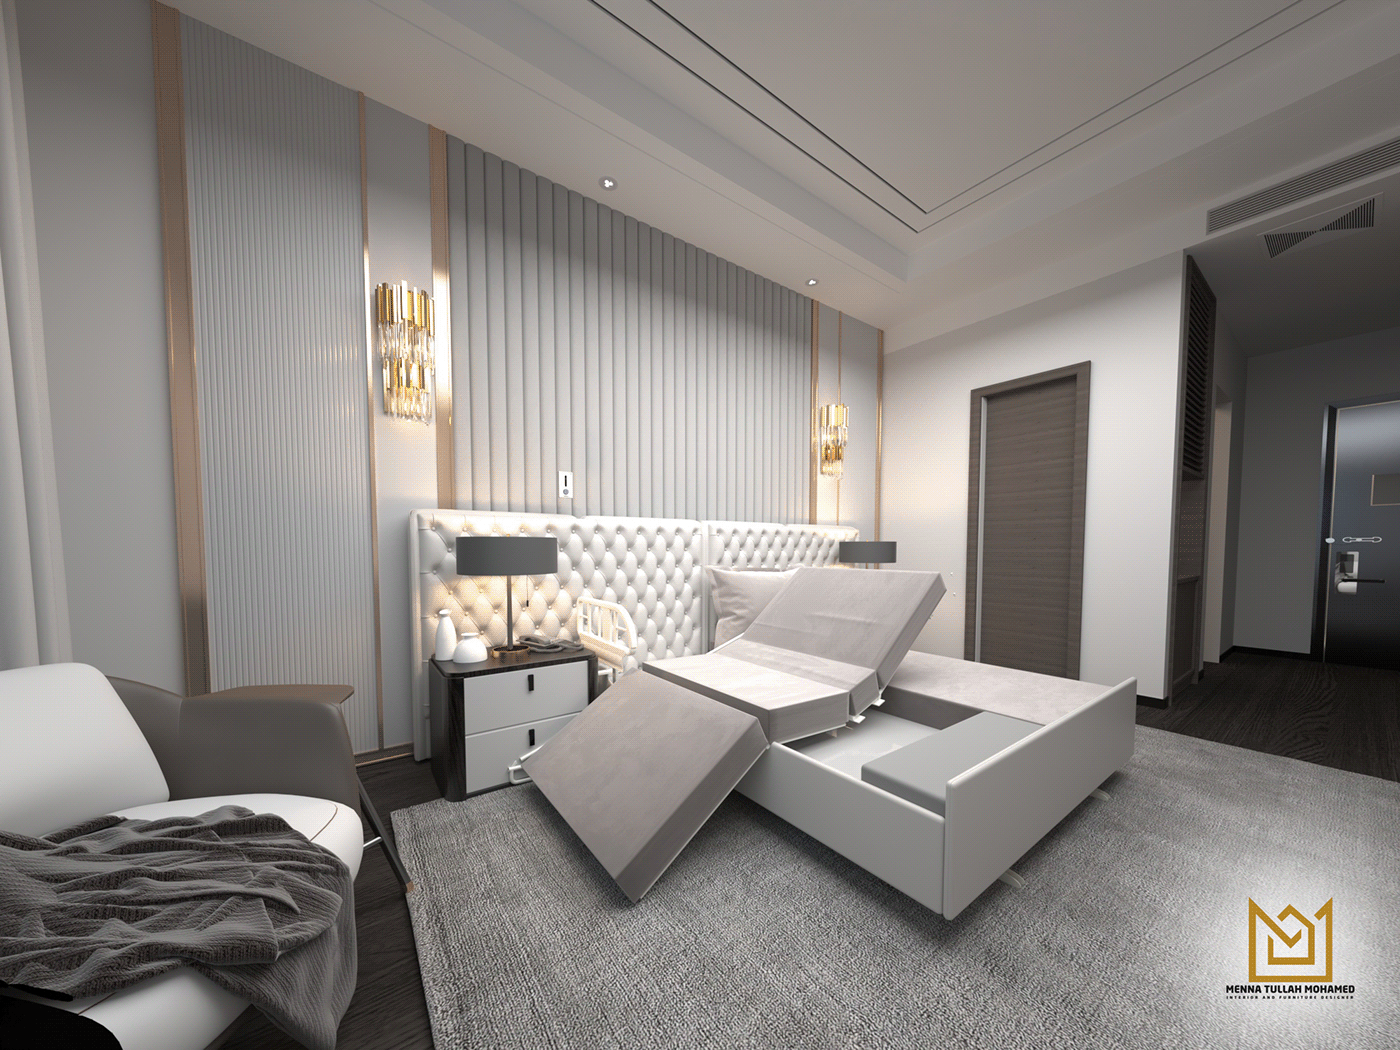 3ds max architecture interior design  modern People with special needs rehabilitation Render resort visualization vray